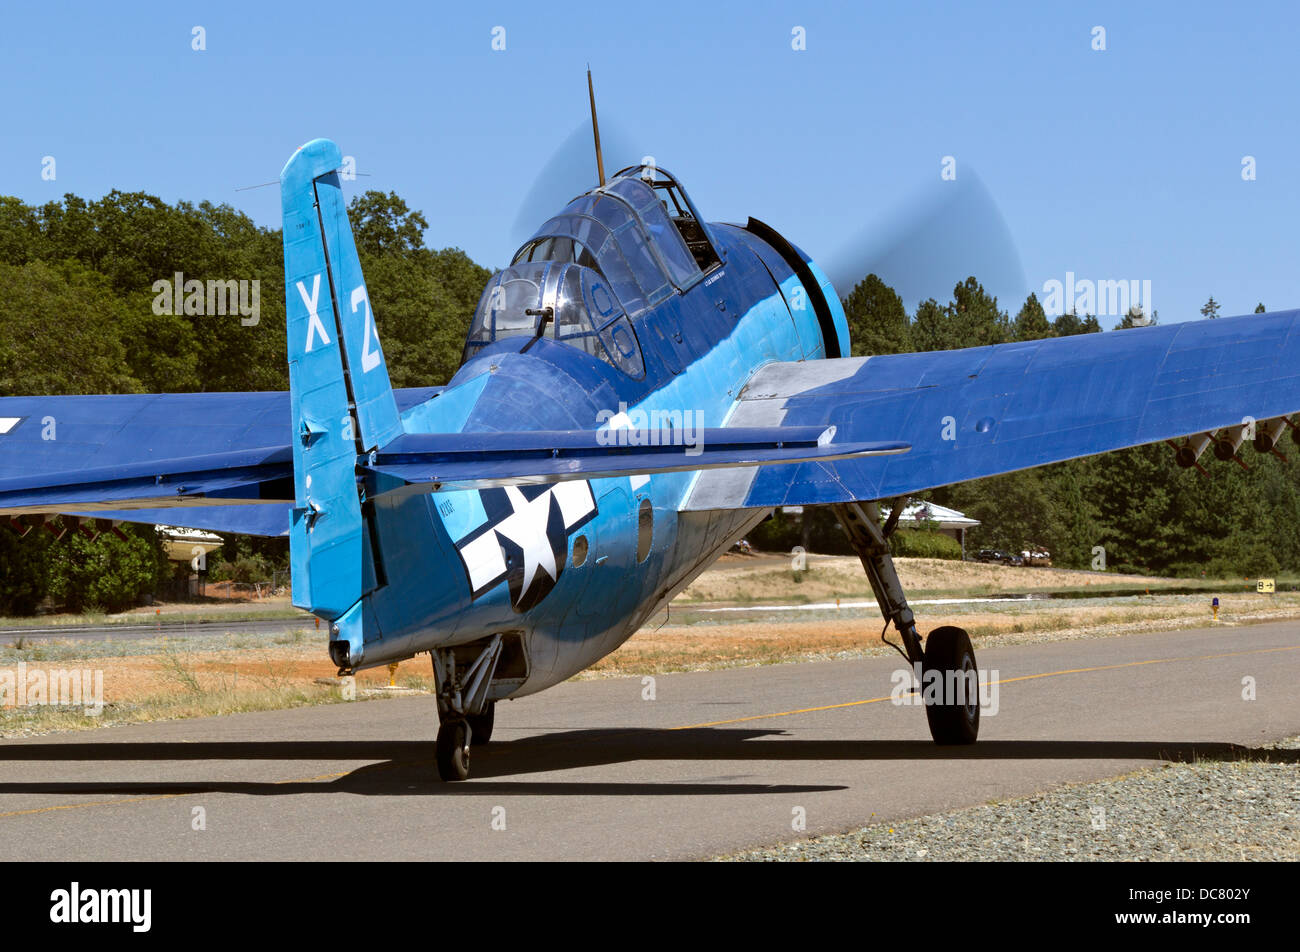 Grumman TBM-3 Avenger, bu85983, piloted by Chuck Wentworth is taxied during the 2013 Grass Valley Airfest Stock Photo